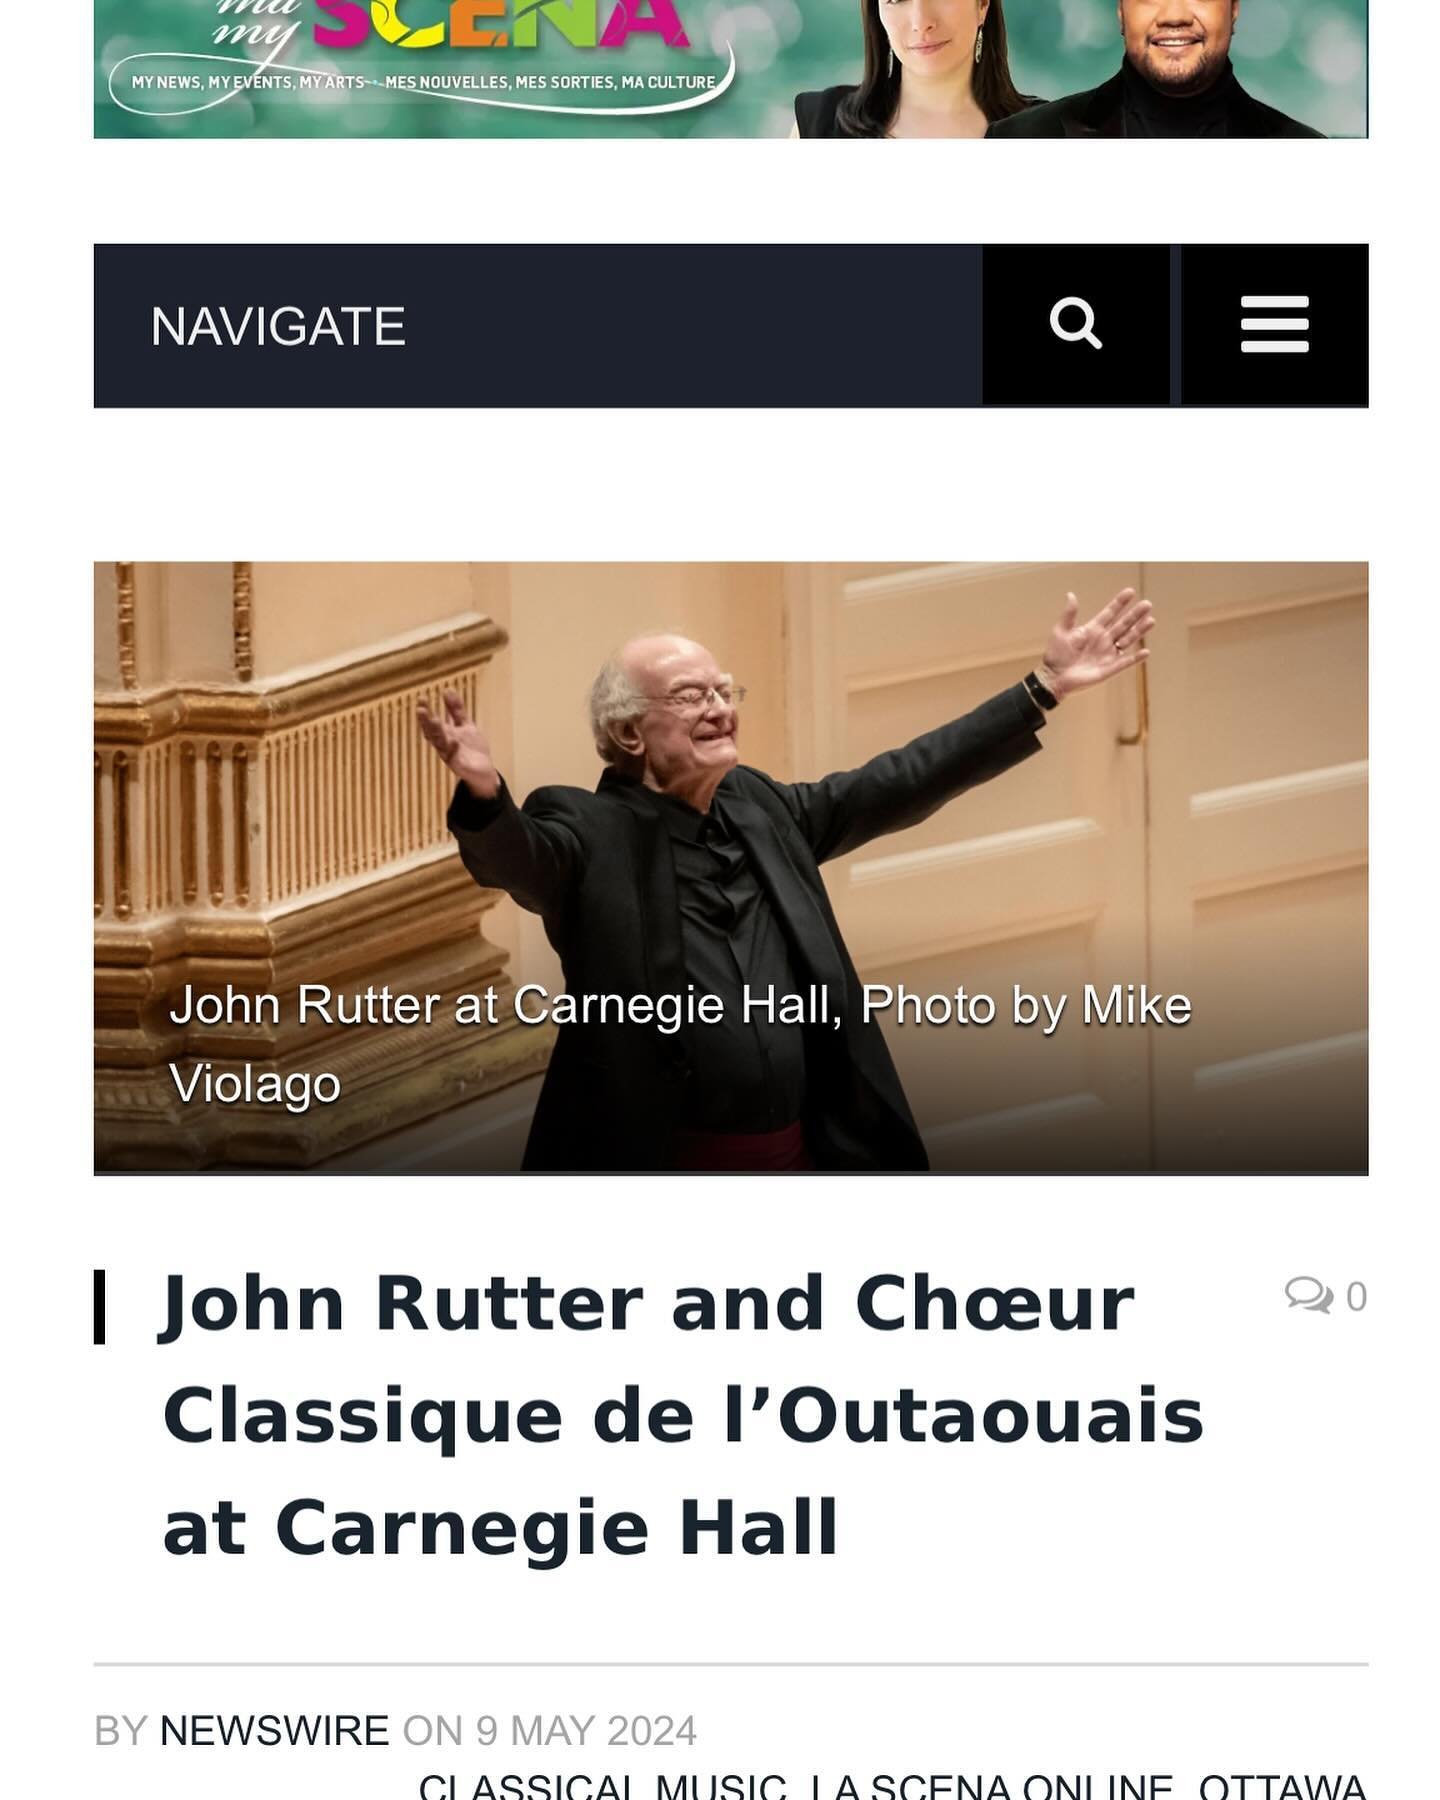 Thank you @lascenamusicale for sharing Ch&oelig;ur classique de l&rsquo;Outaouais upcoming performance at @carnegiehall on Saturday, May 25, 2024. Get your ticket today!
#choralmusic #choralsinging #carnegiehall #gatineau #gatineauottawa